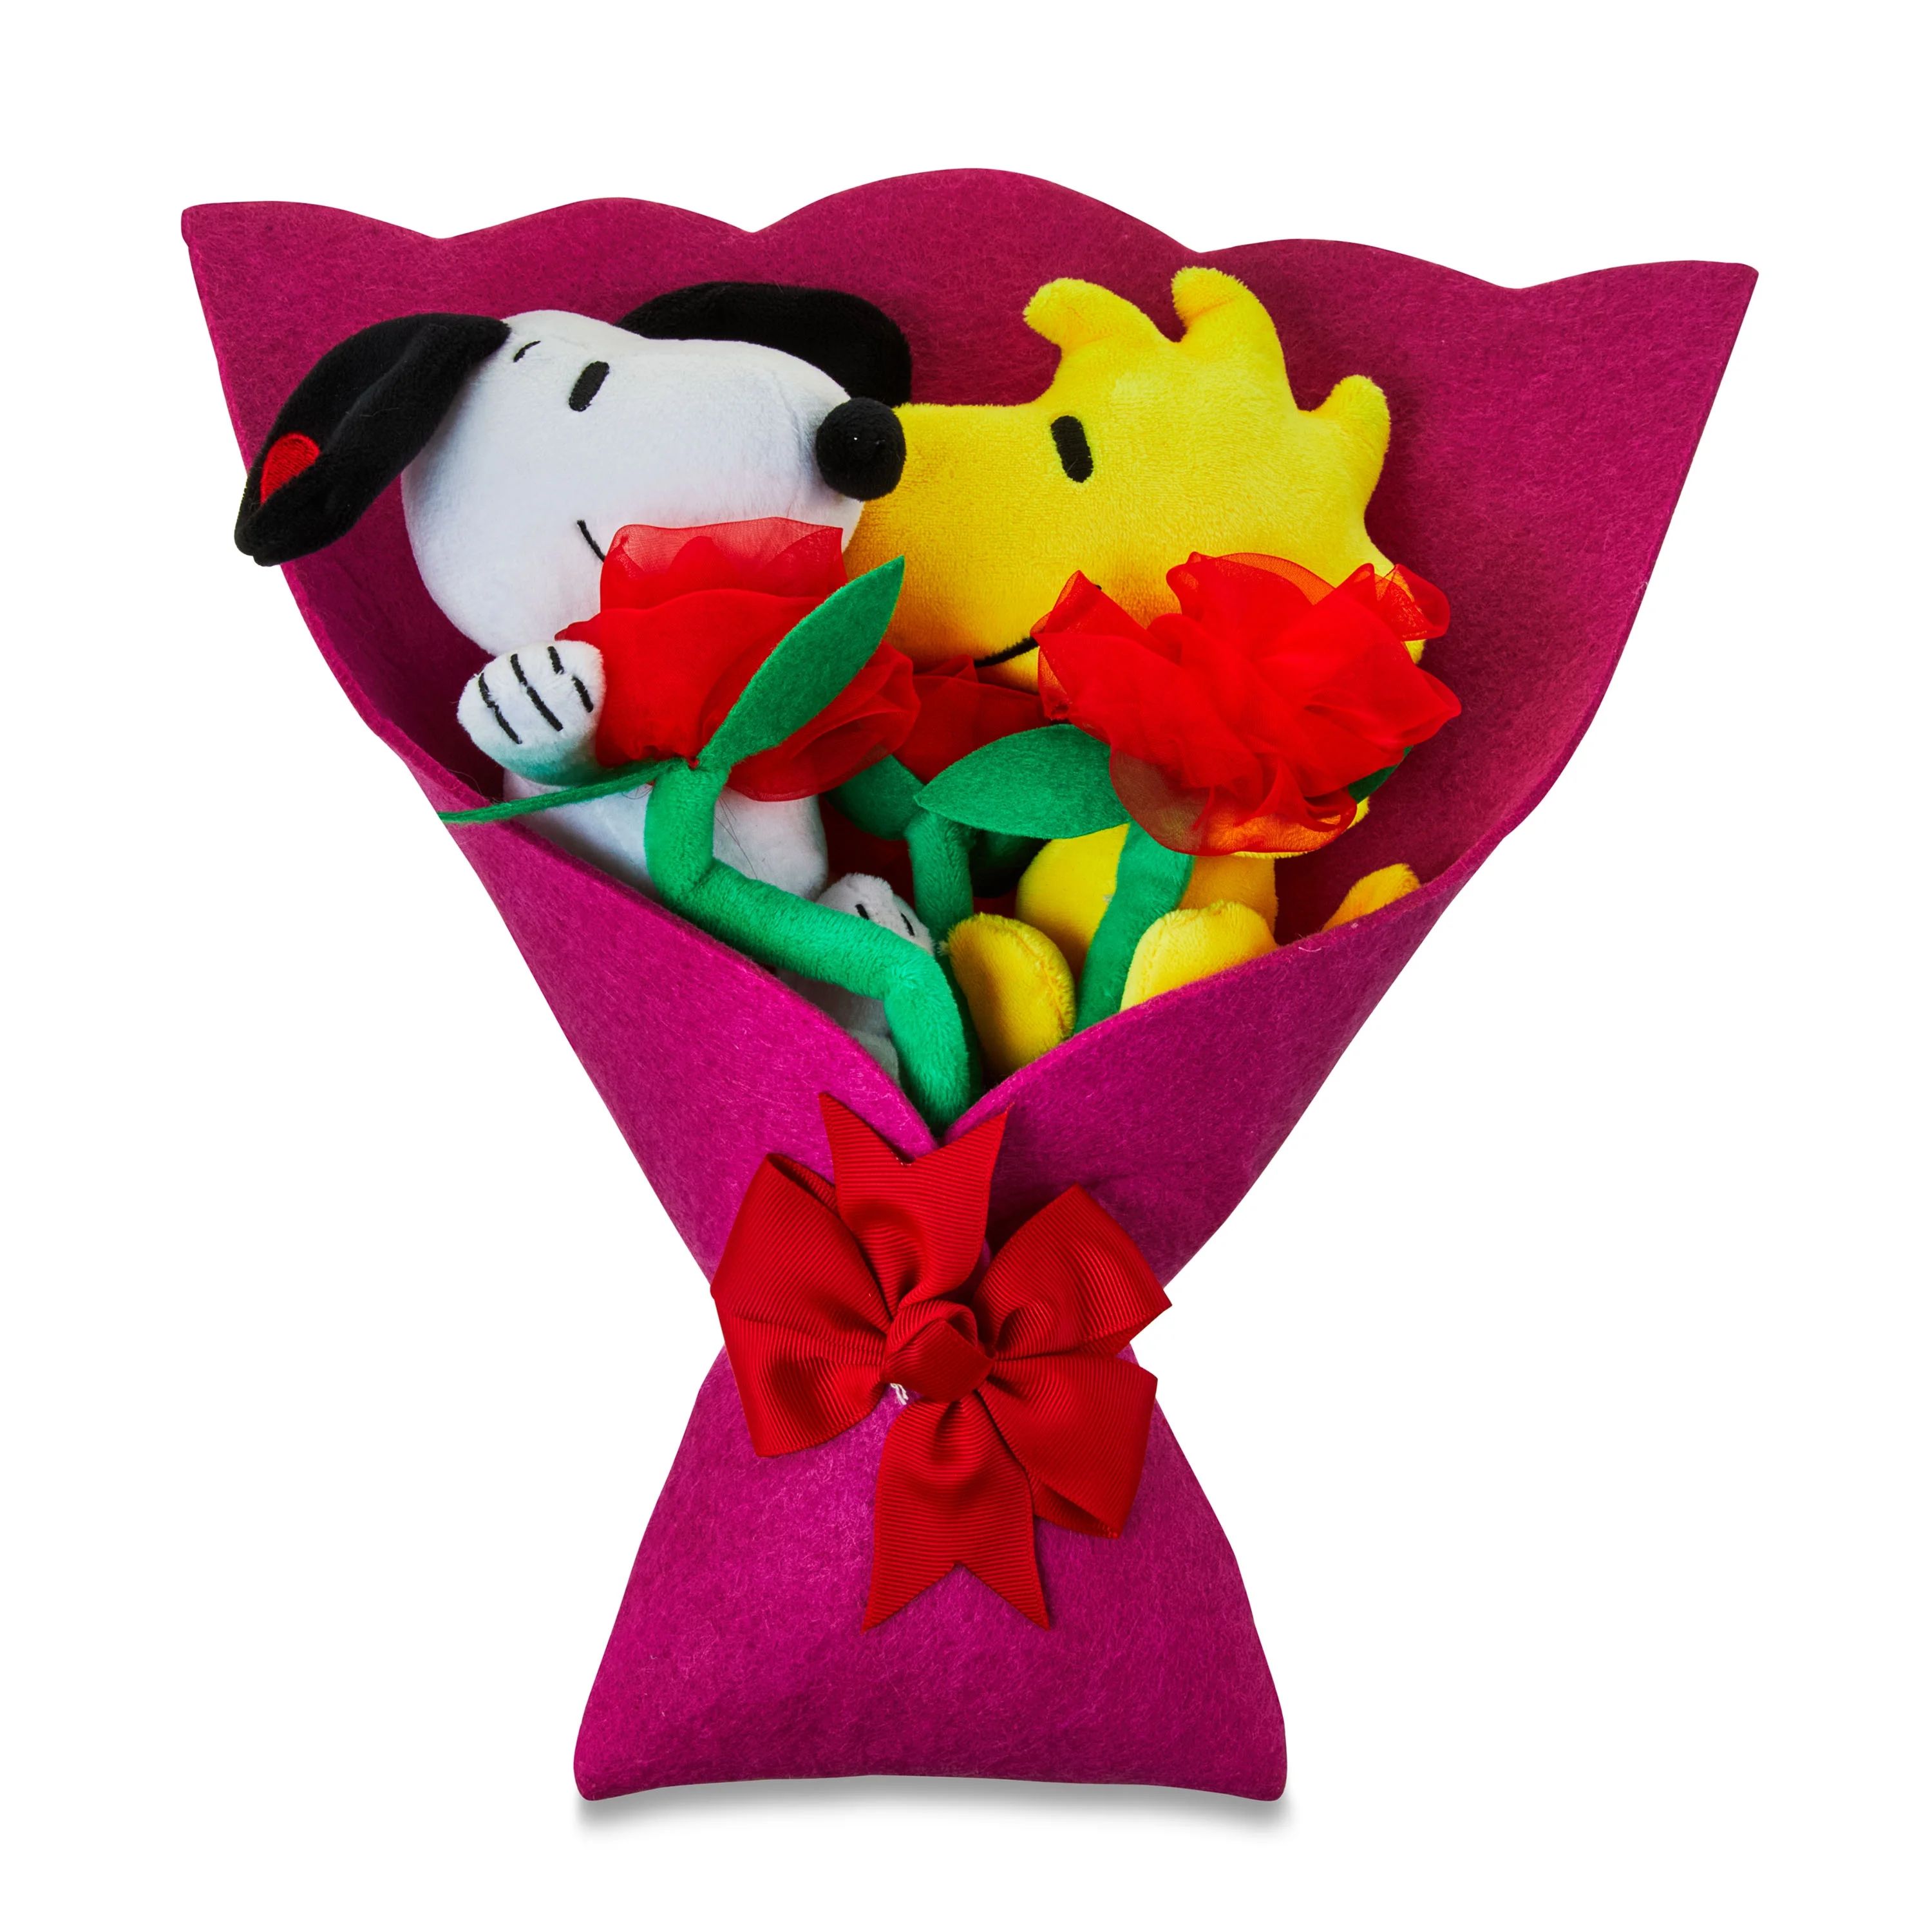 Peanuts, Snoopy and Woodstock Plush Valentine's Bouquet, Multi-Color, All Ages | Walmart (US)